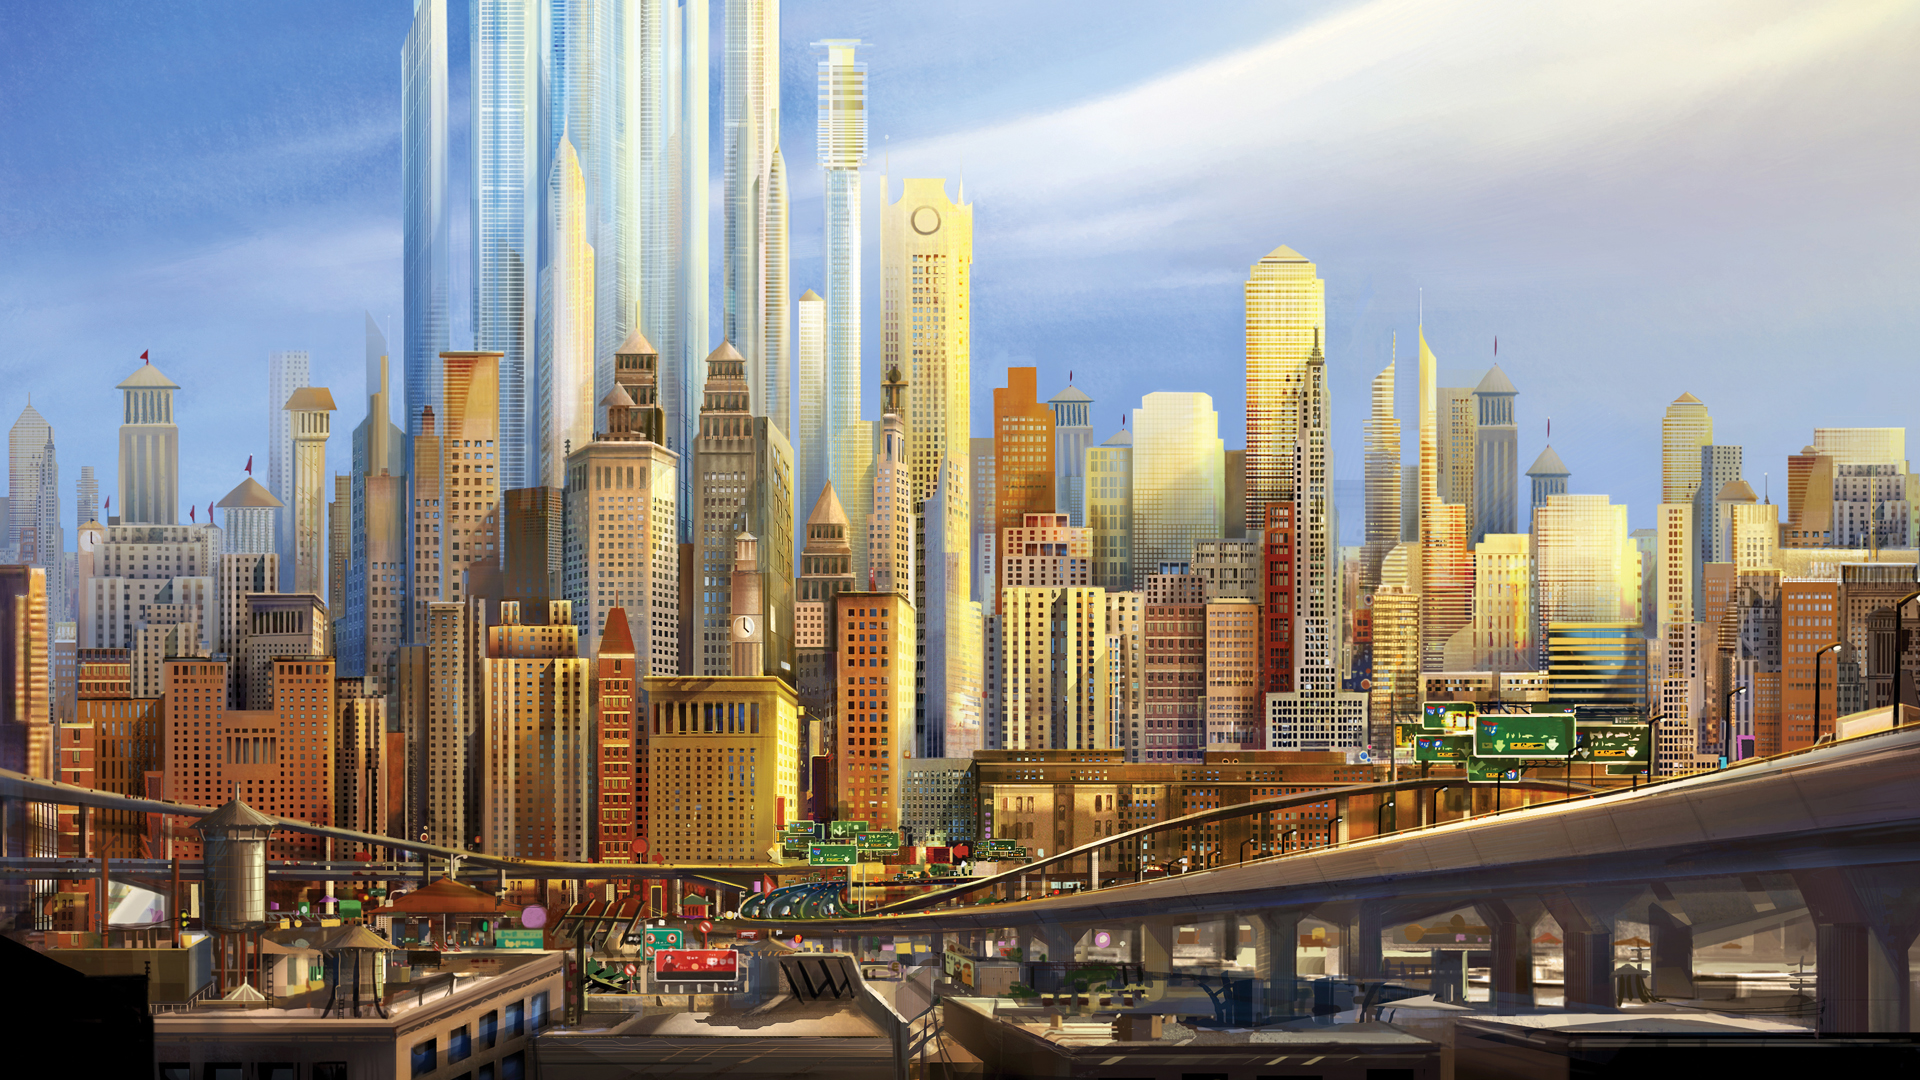 7 Animated Megamind city HD wallpaper :: Anime City Painting Hd